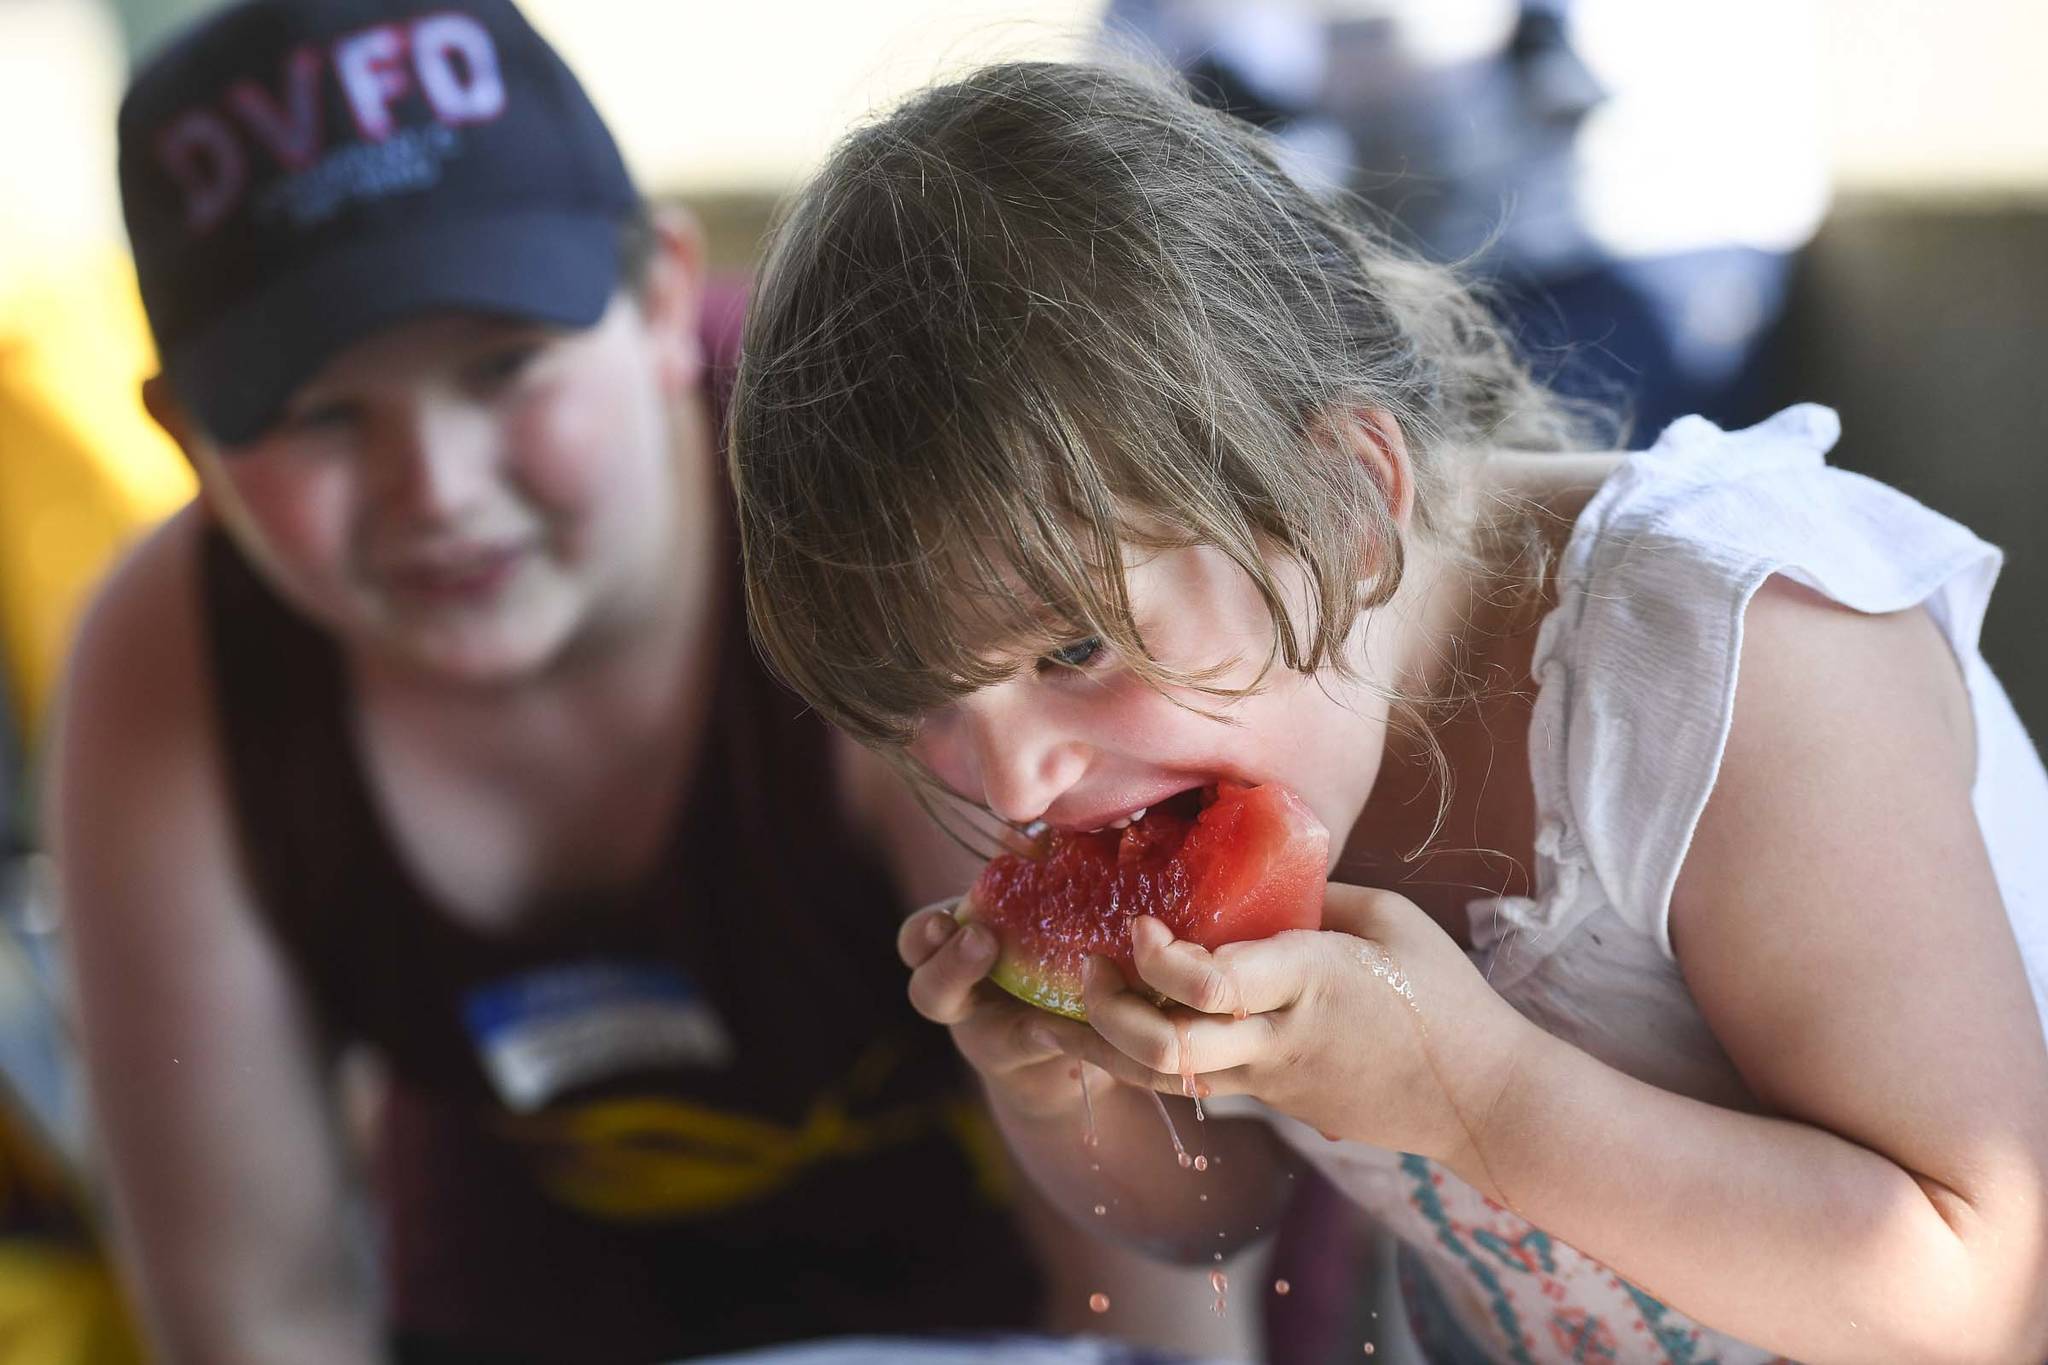 Joseph Race, 8, left, cheers on his sister, Lyllianna, 5, in a watermelon eating contest during a community picnic sponsored by the Douglas Fourth of July Committee and Capital City Fire/Rescue at Sandy Beach on Wednesday, July 3, 2019. (Michael Penn | Juneau Empire)